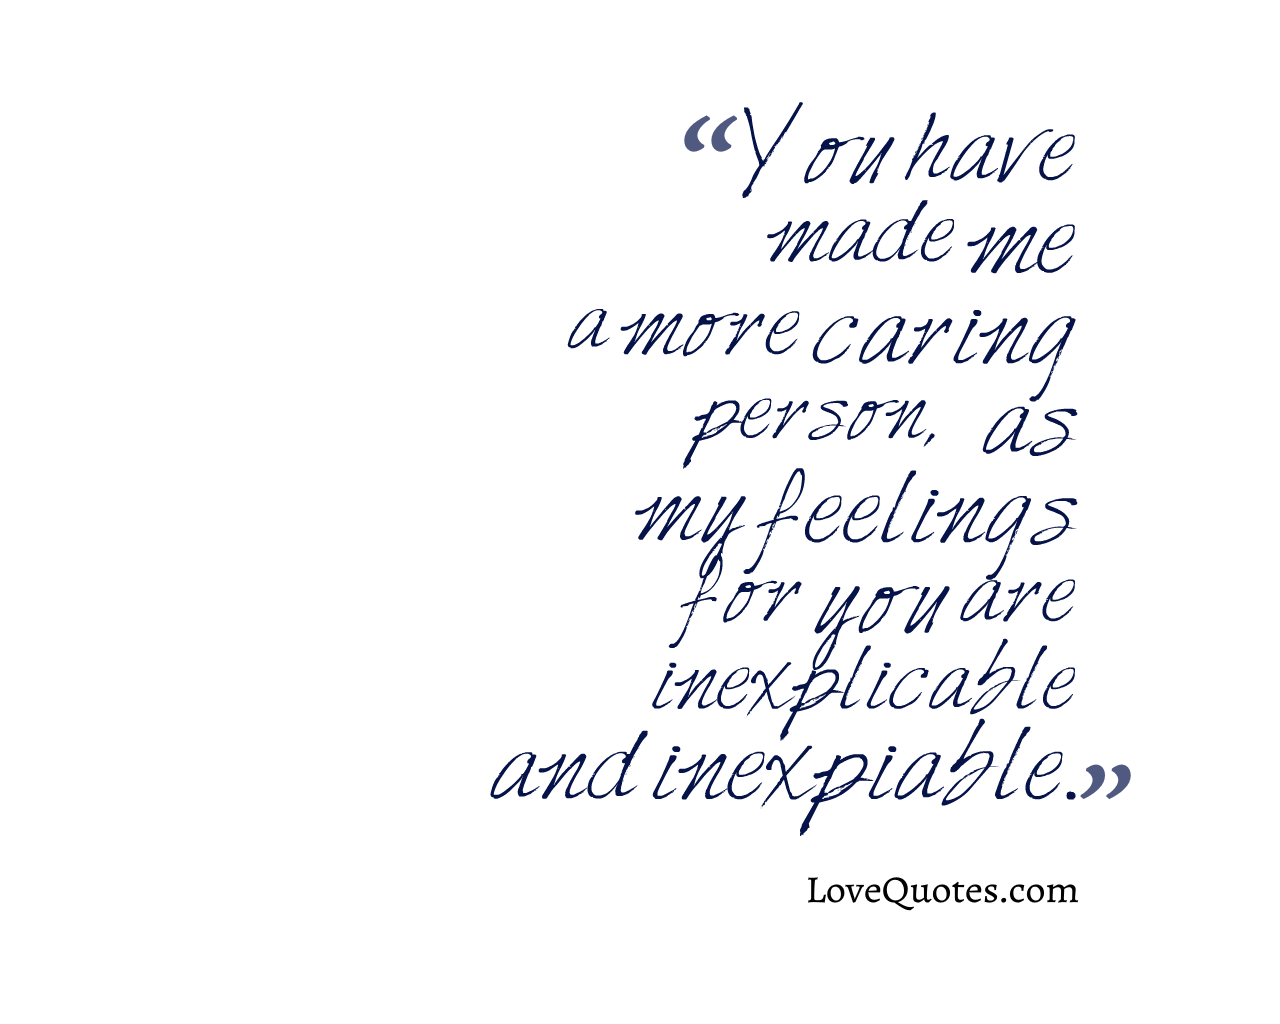 My Feelings For You Love Quotes